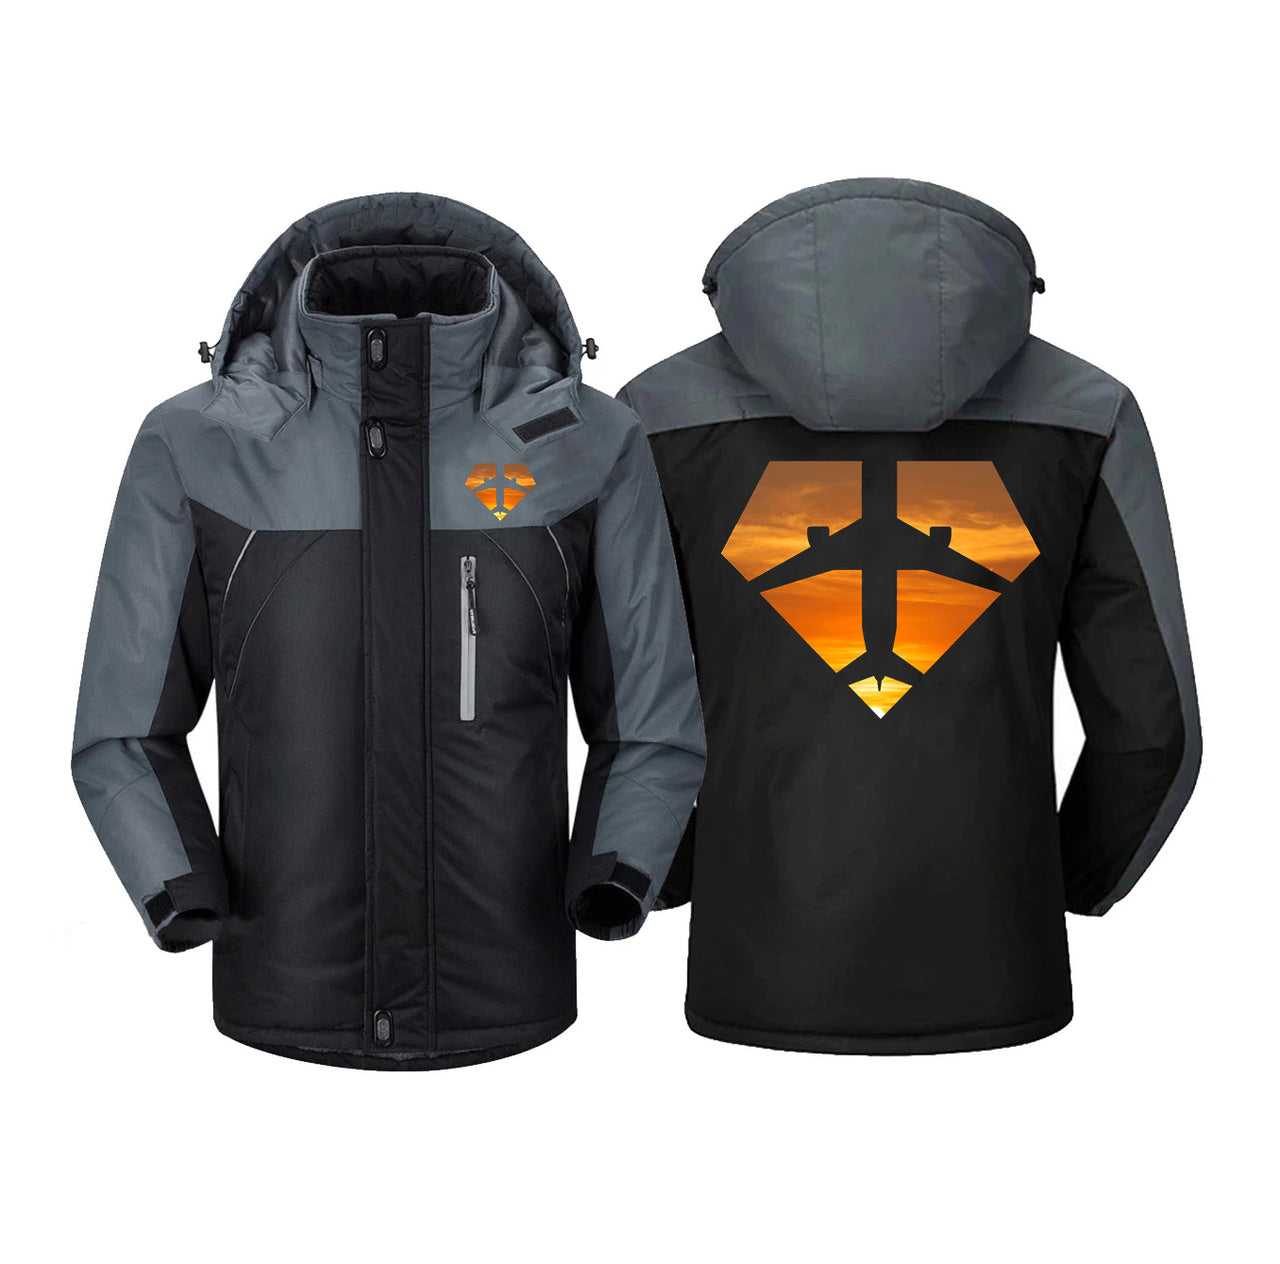 Supermen of The Skies (Sunset) Designed Thick Winter Jackets